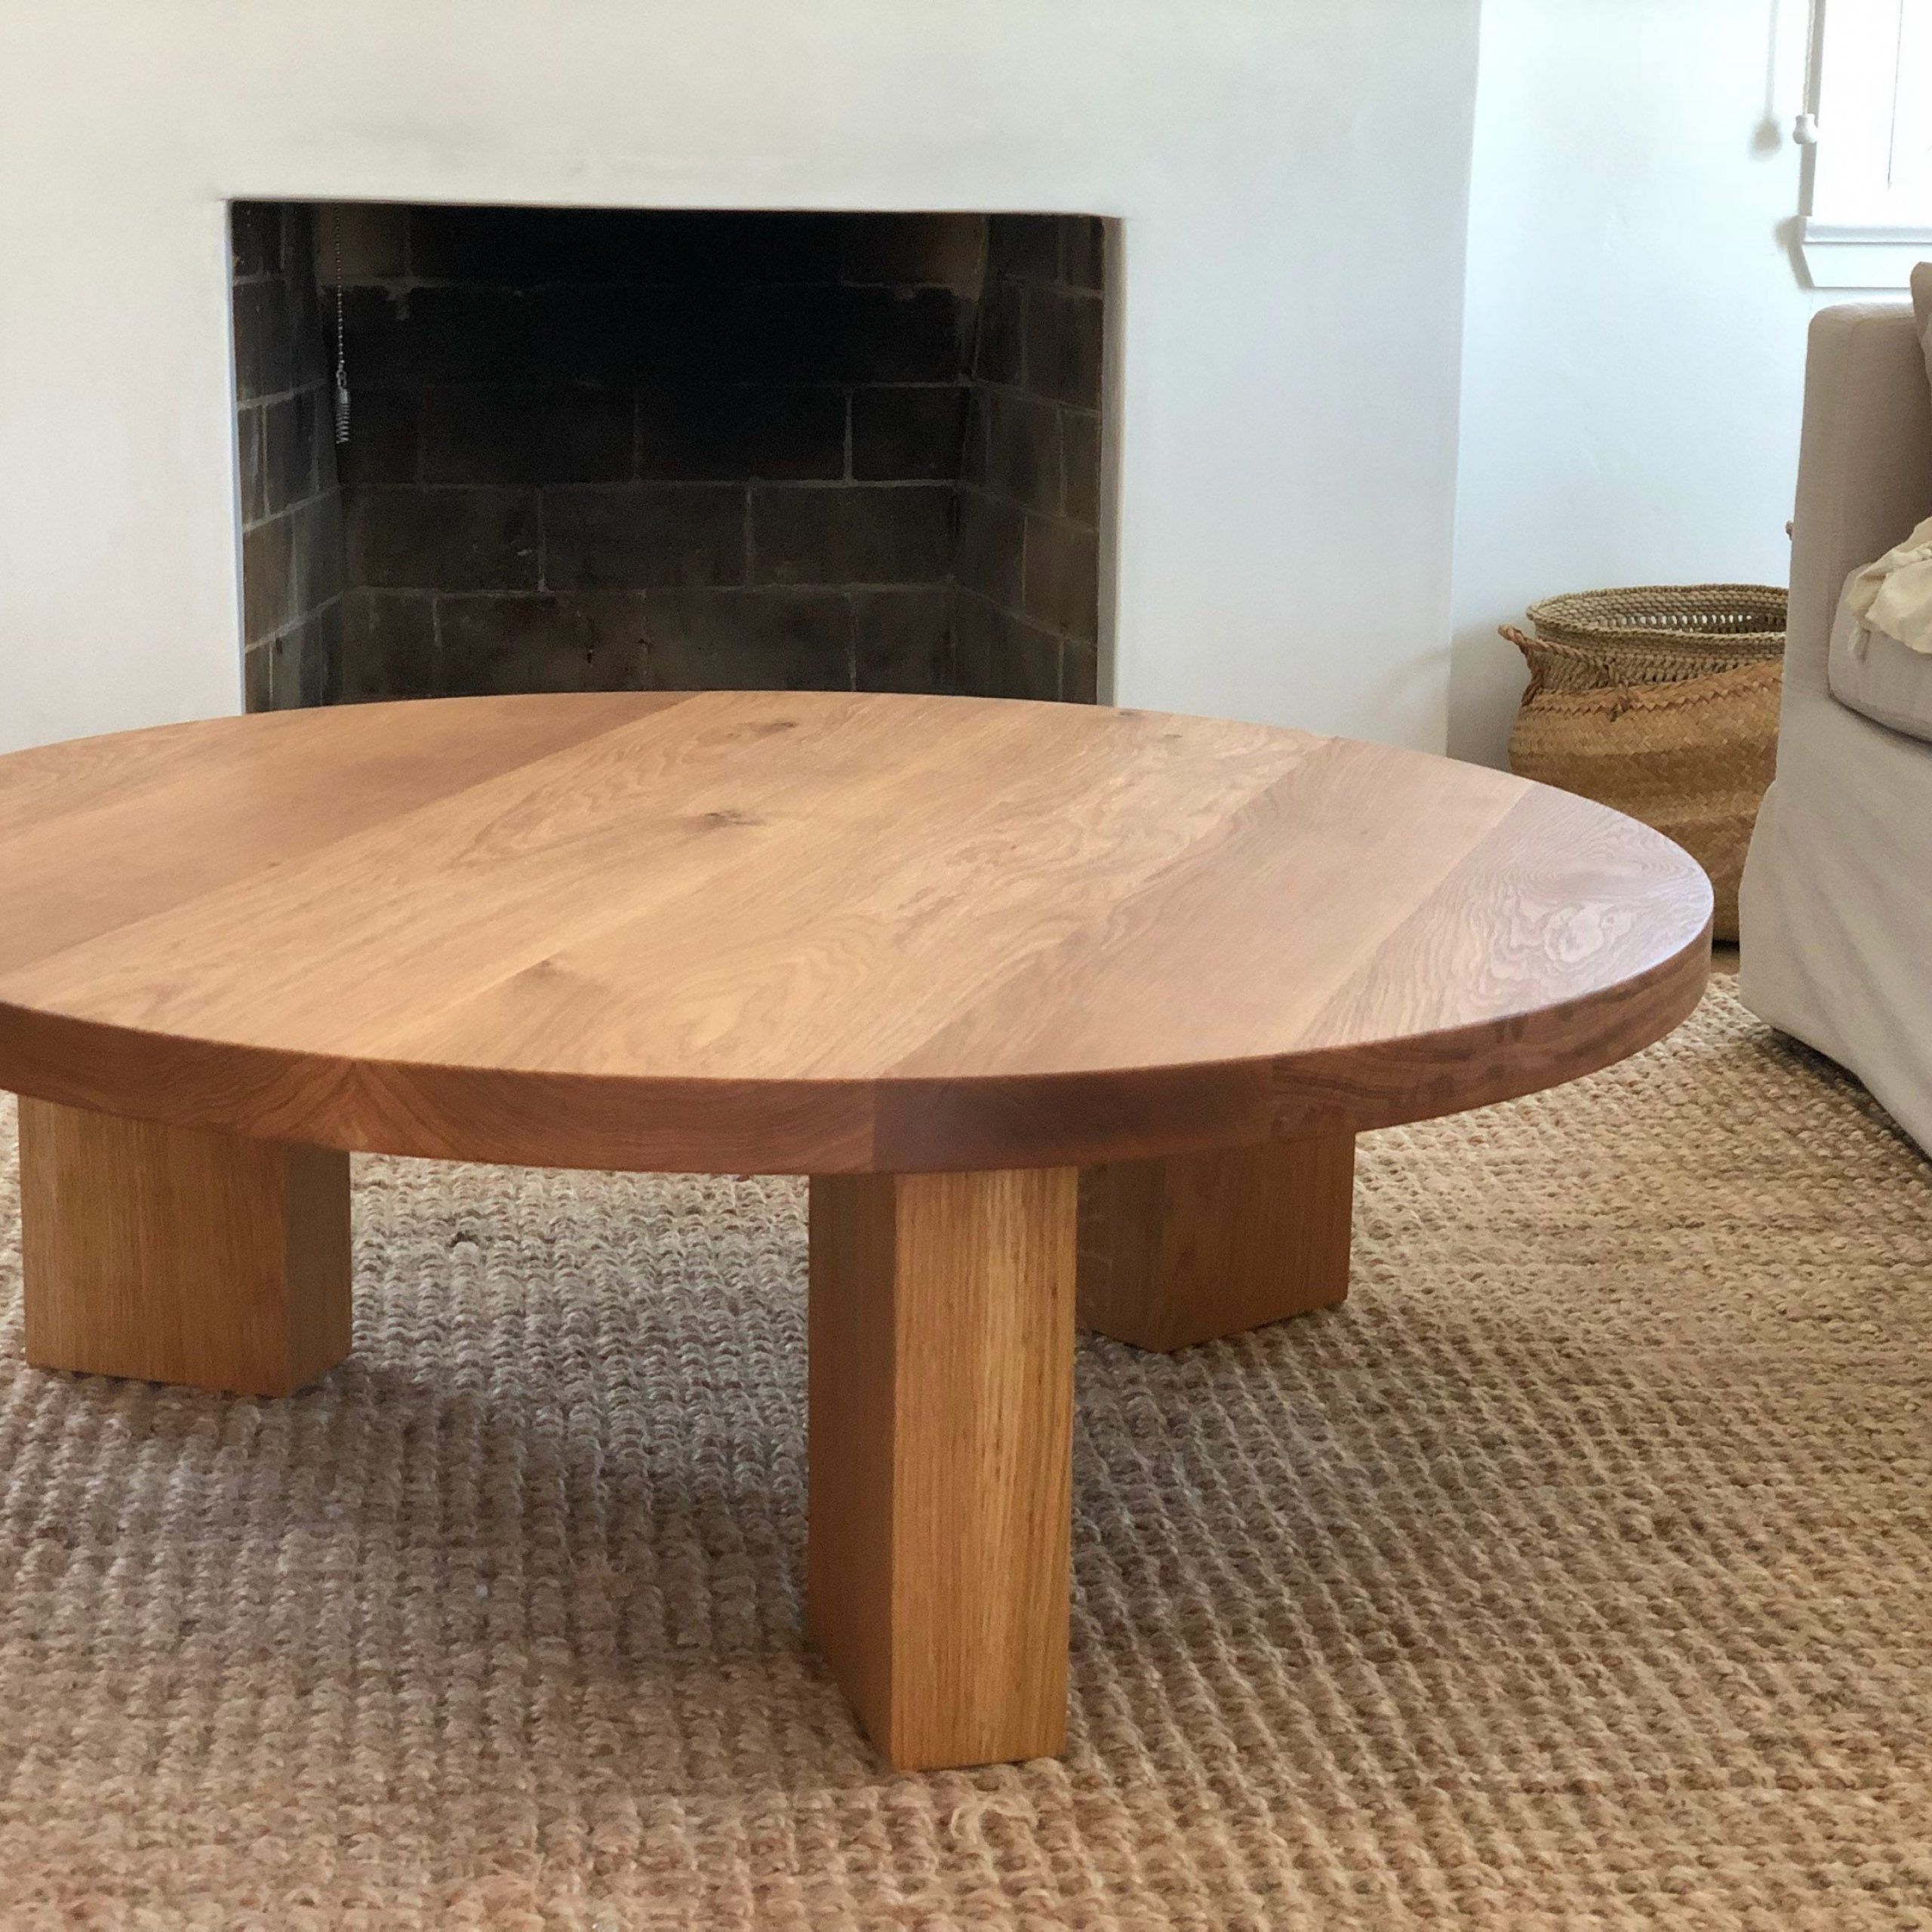 Trendy Modern Round Coffee Tables Throughout The Og 40 White Oak Modern Round 3 Leg Coffee Table – Etsy (View 6 of 20)